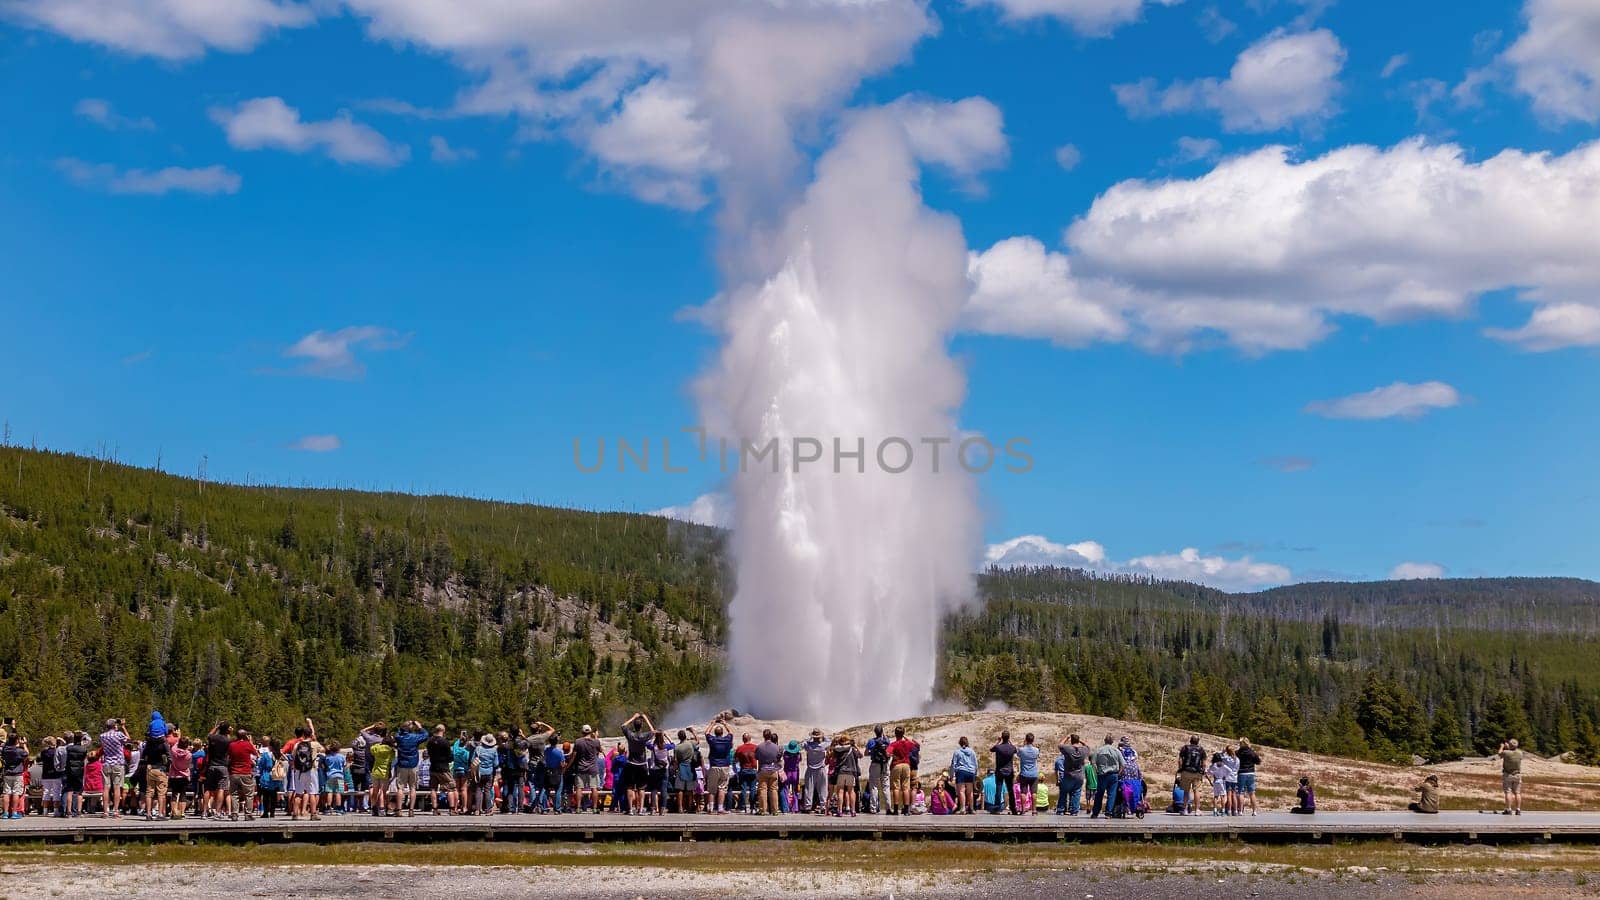 Old Faithful Geyser in Yellowstone National Park, USA by f11photo